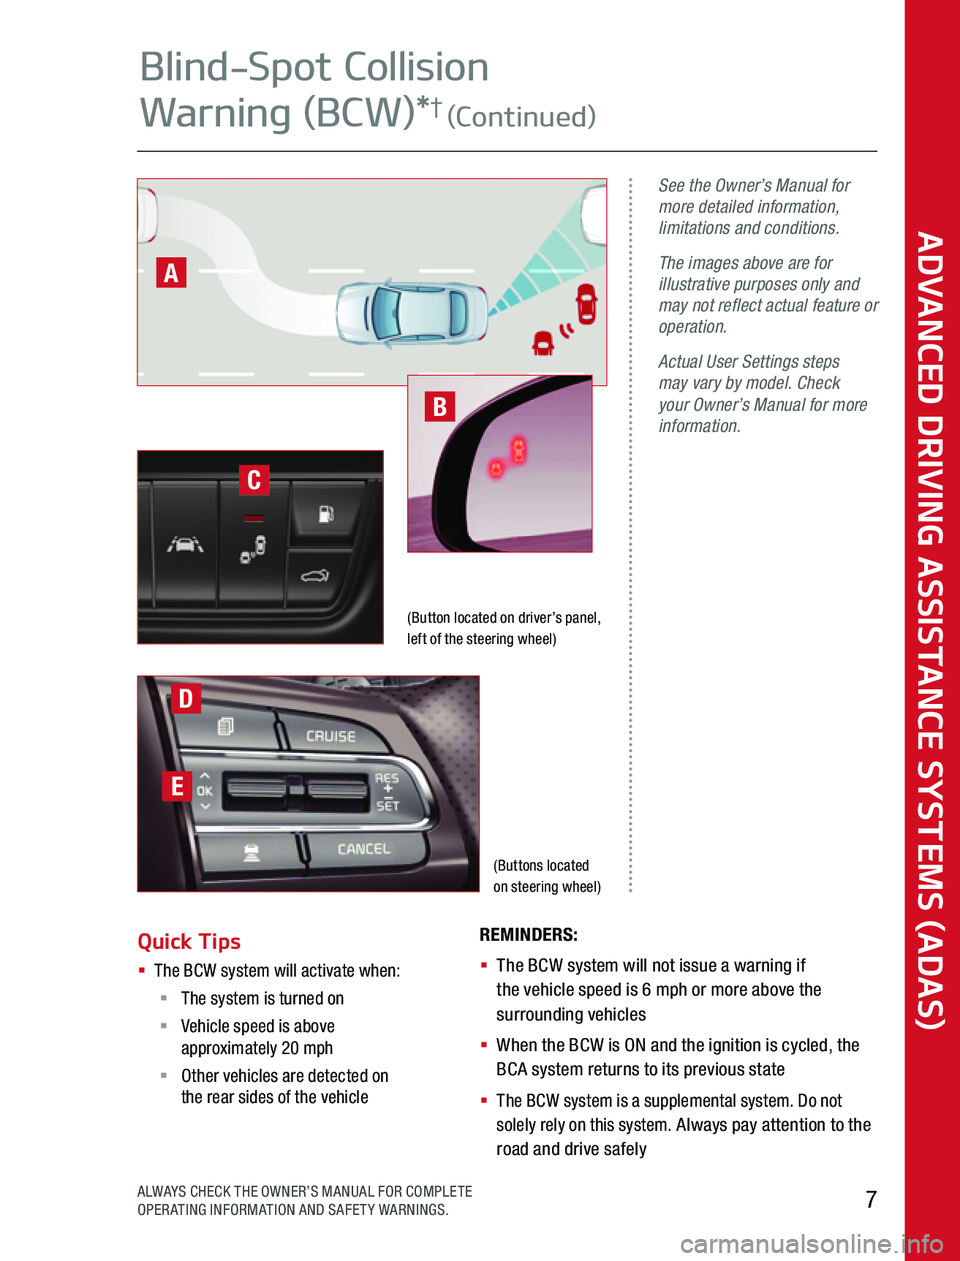 KIA NIRO PHEV 2020  Advanced Driving Assistance System (Buttons located  on steering wheel)
See the Owner’s Manual for more detailed information, limitations and conditions.
The images above are for illustrative purposes only and may not reflect actual 